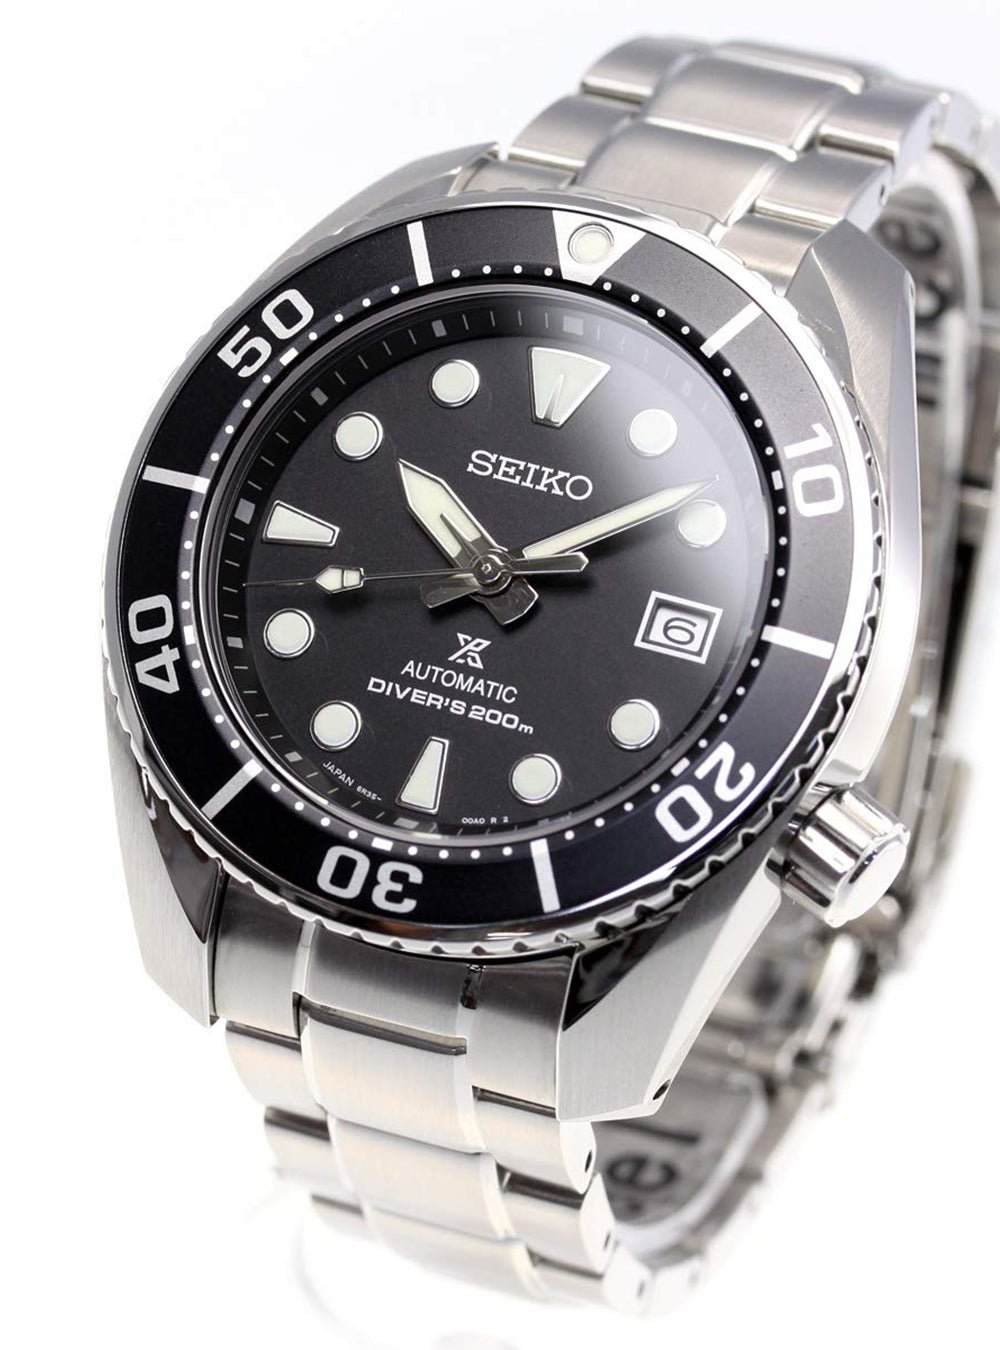 SEIKO Prospex 200M Diver Automatic SBDC083 Made in Japan JDM (Japanese ...